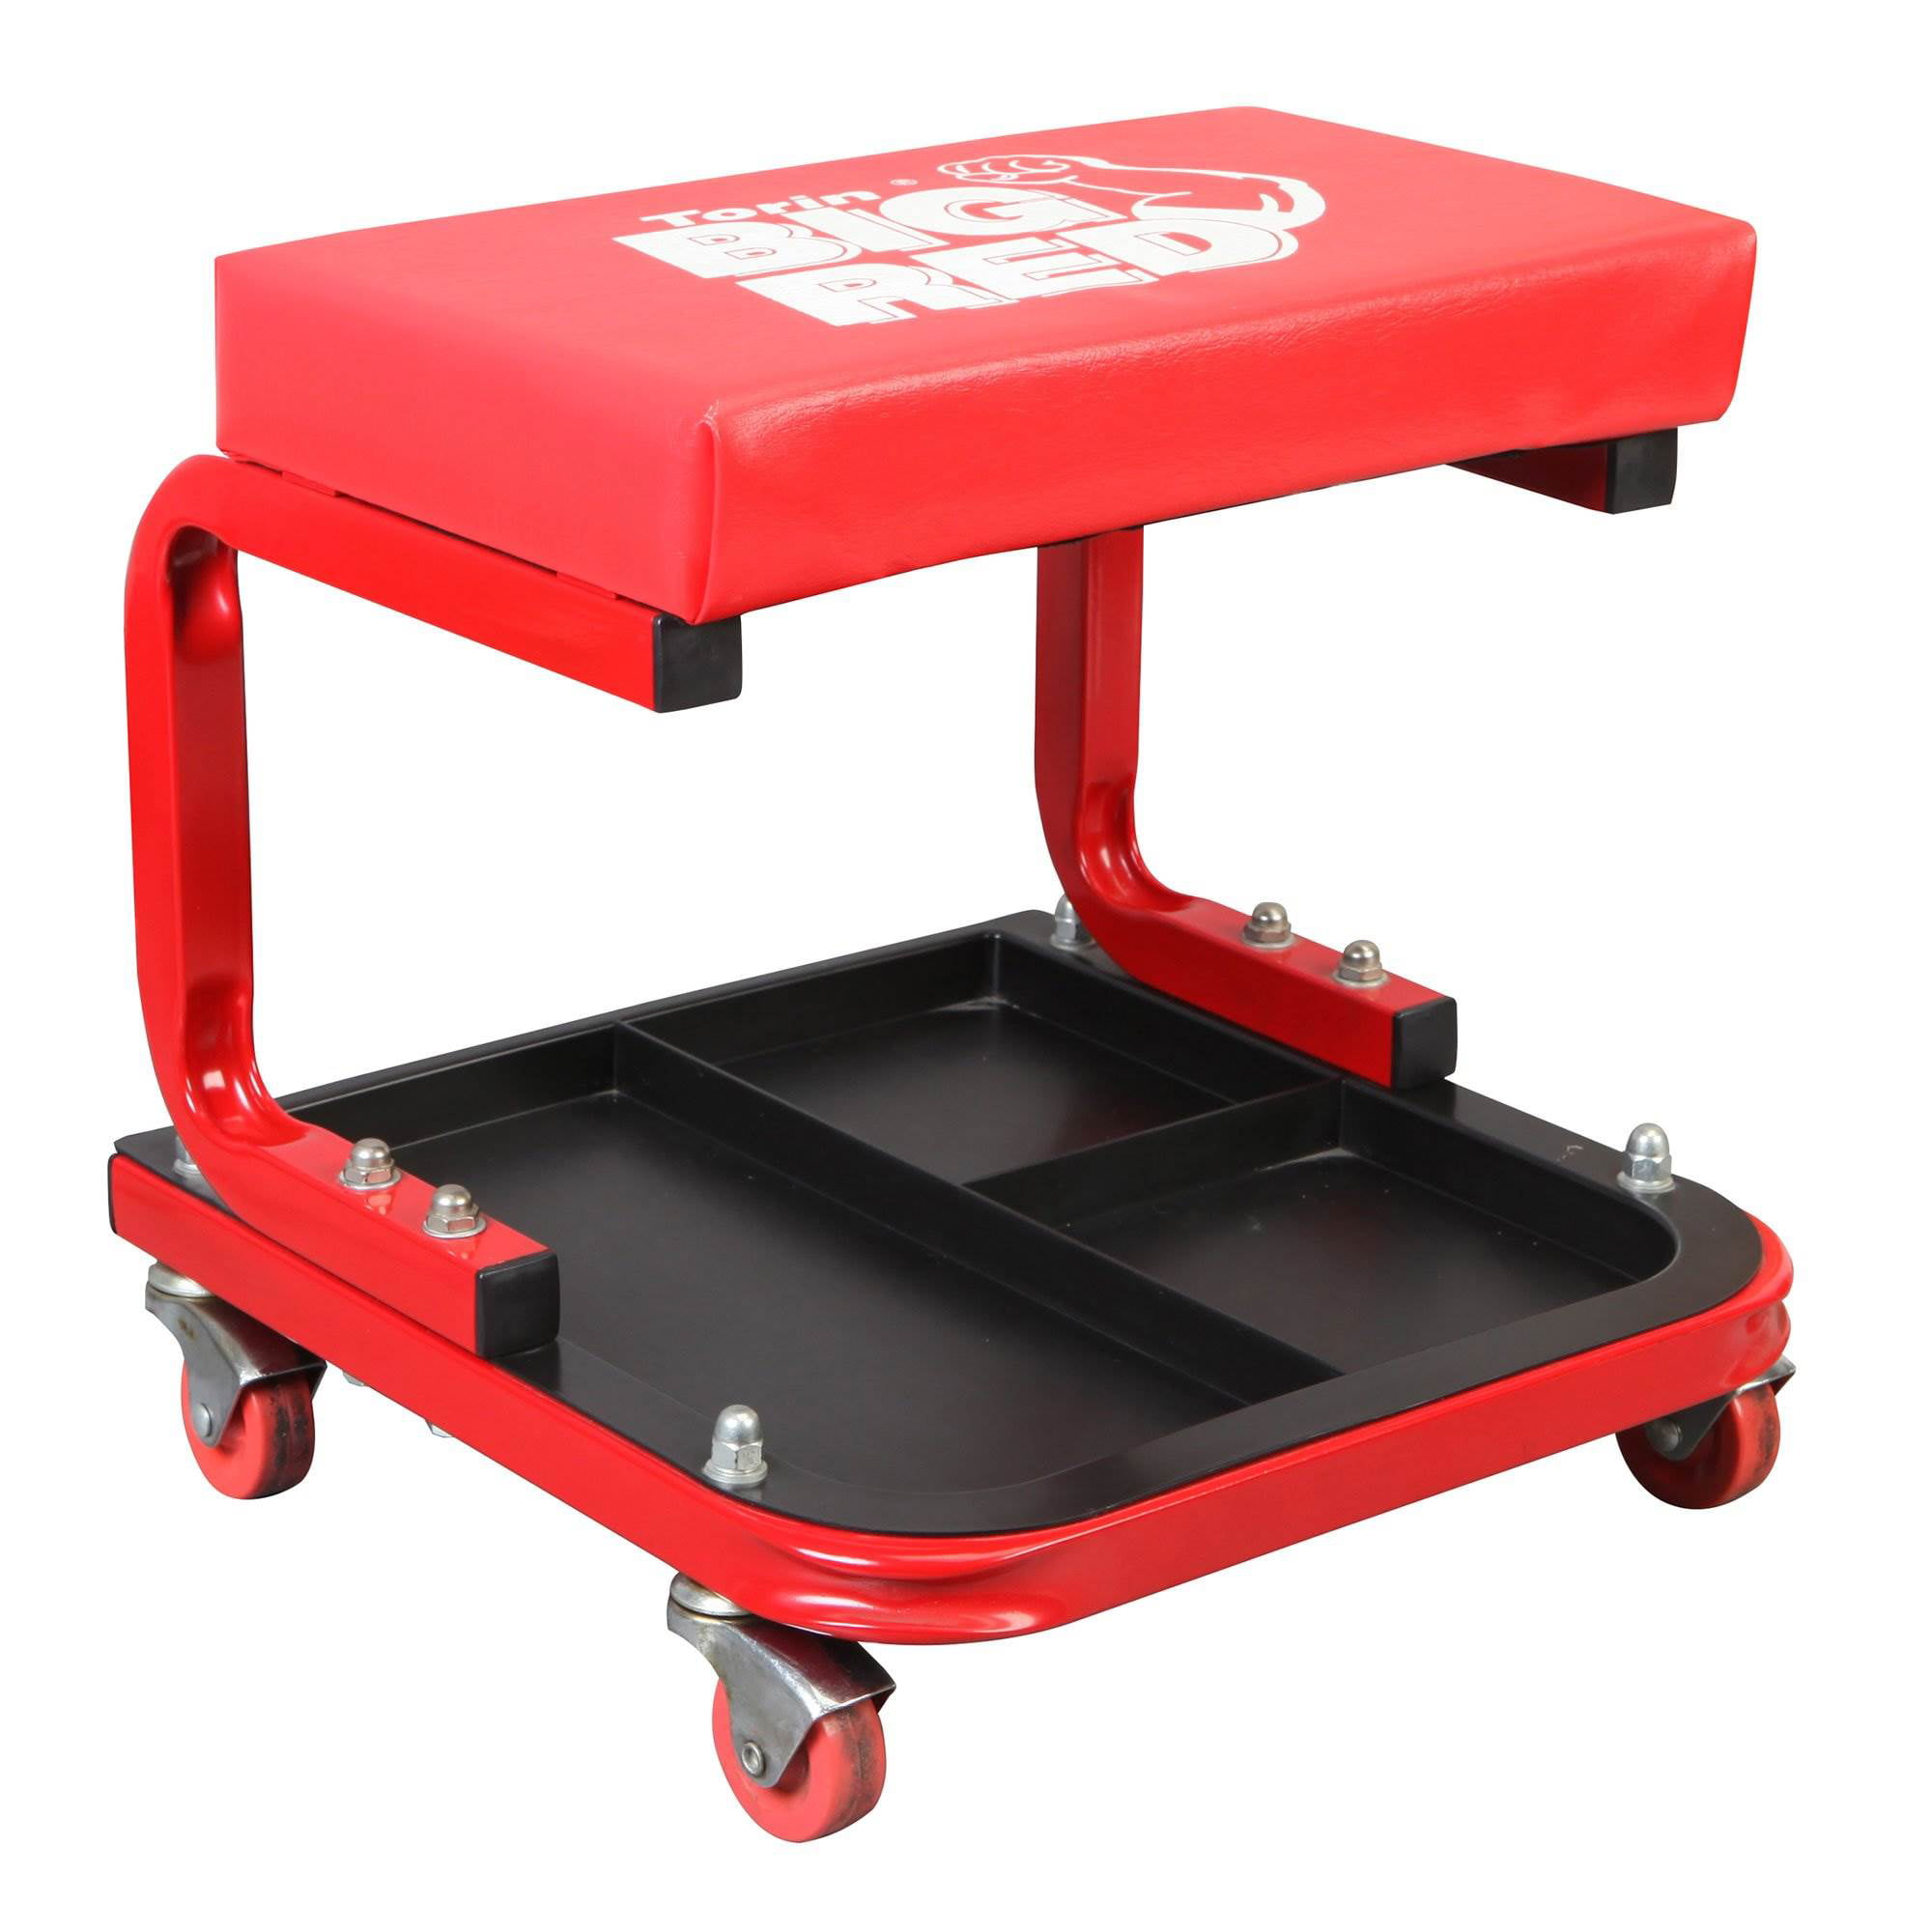 MotoGroup Black Rolling Creeper Garage Shop Padded Mechanic Stool with Divided Tool Tray and Red Padded Seat 